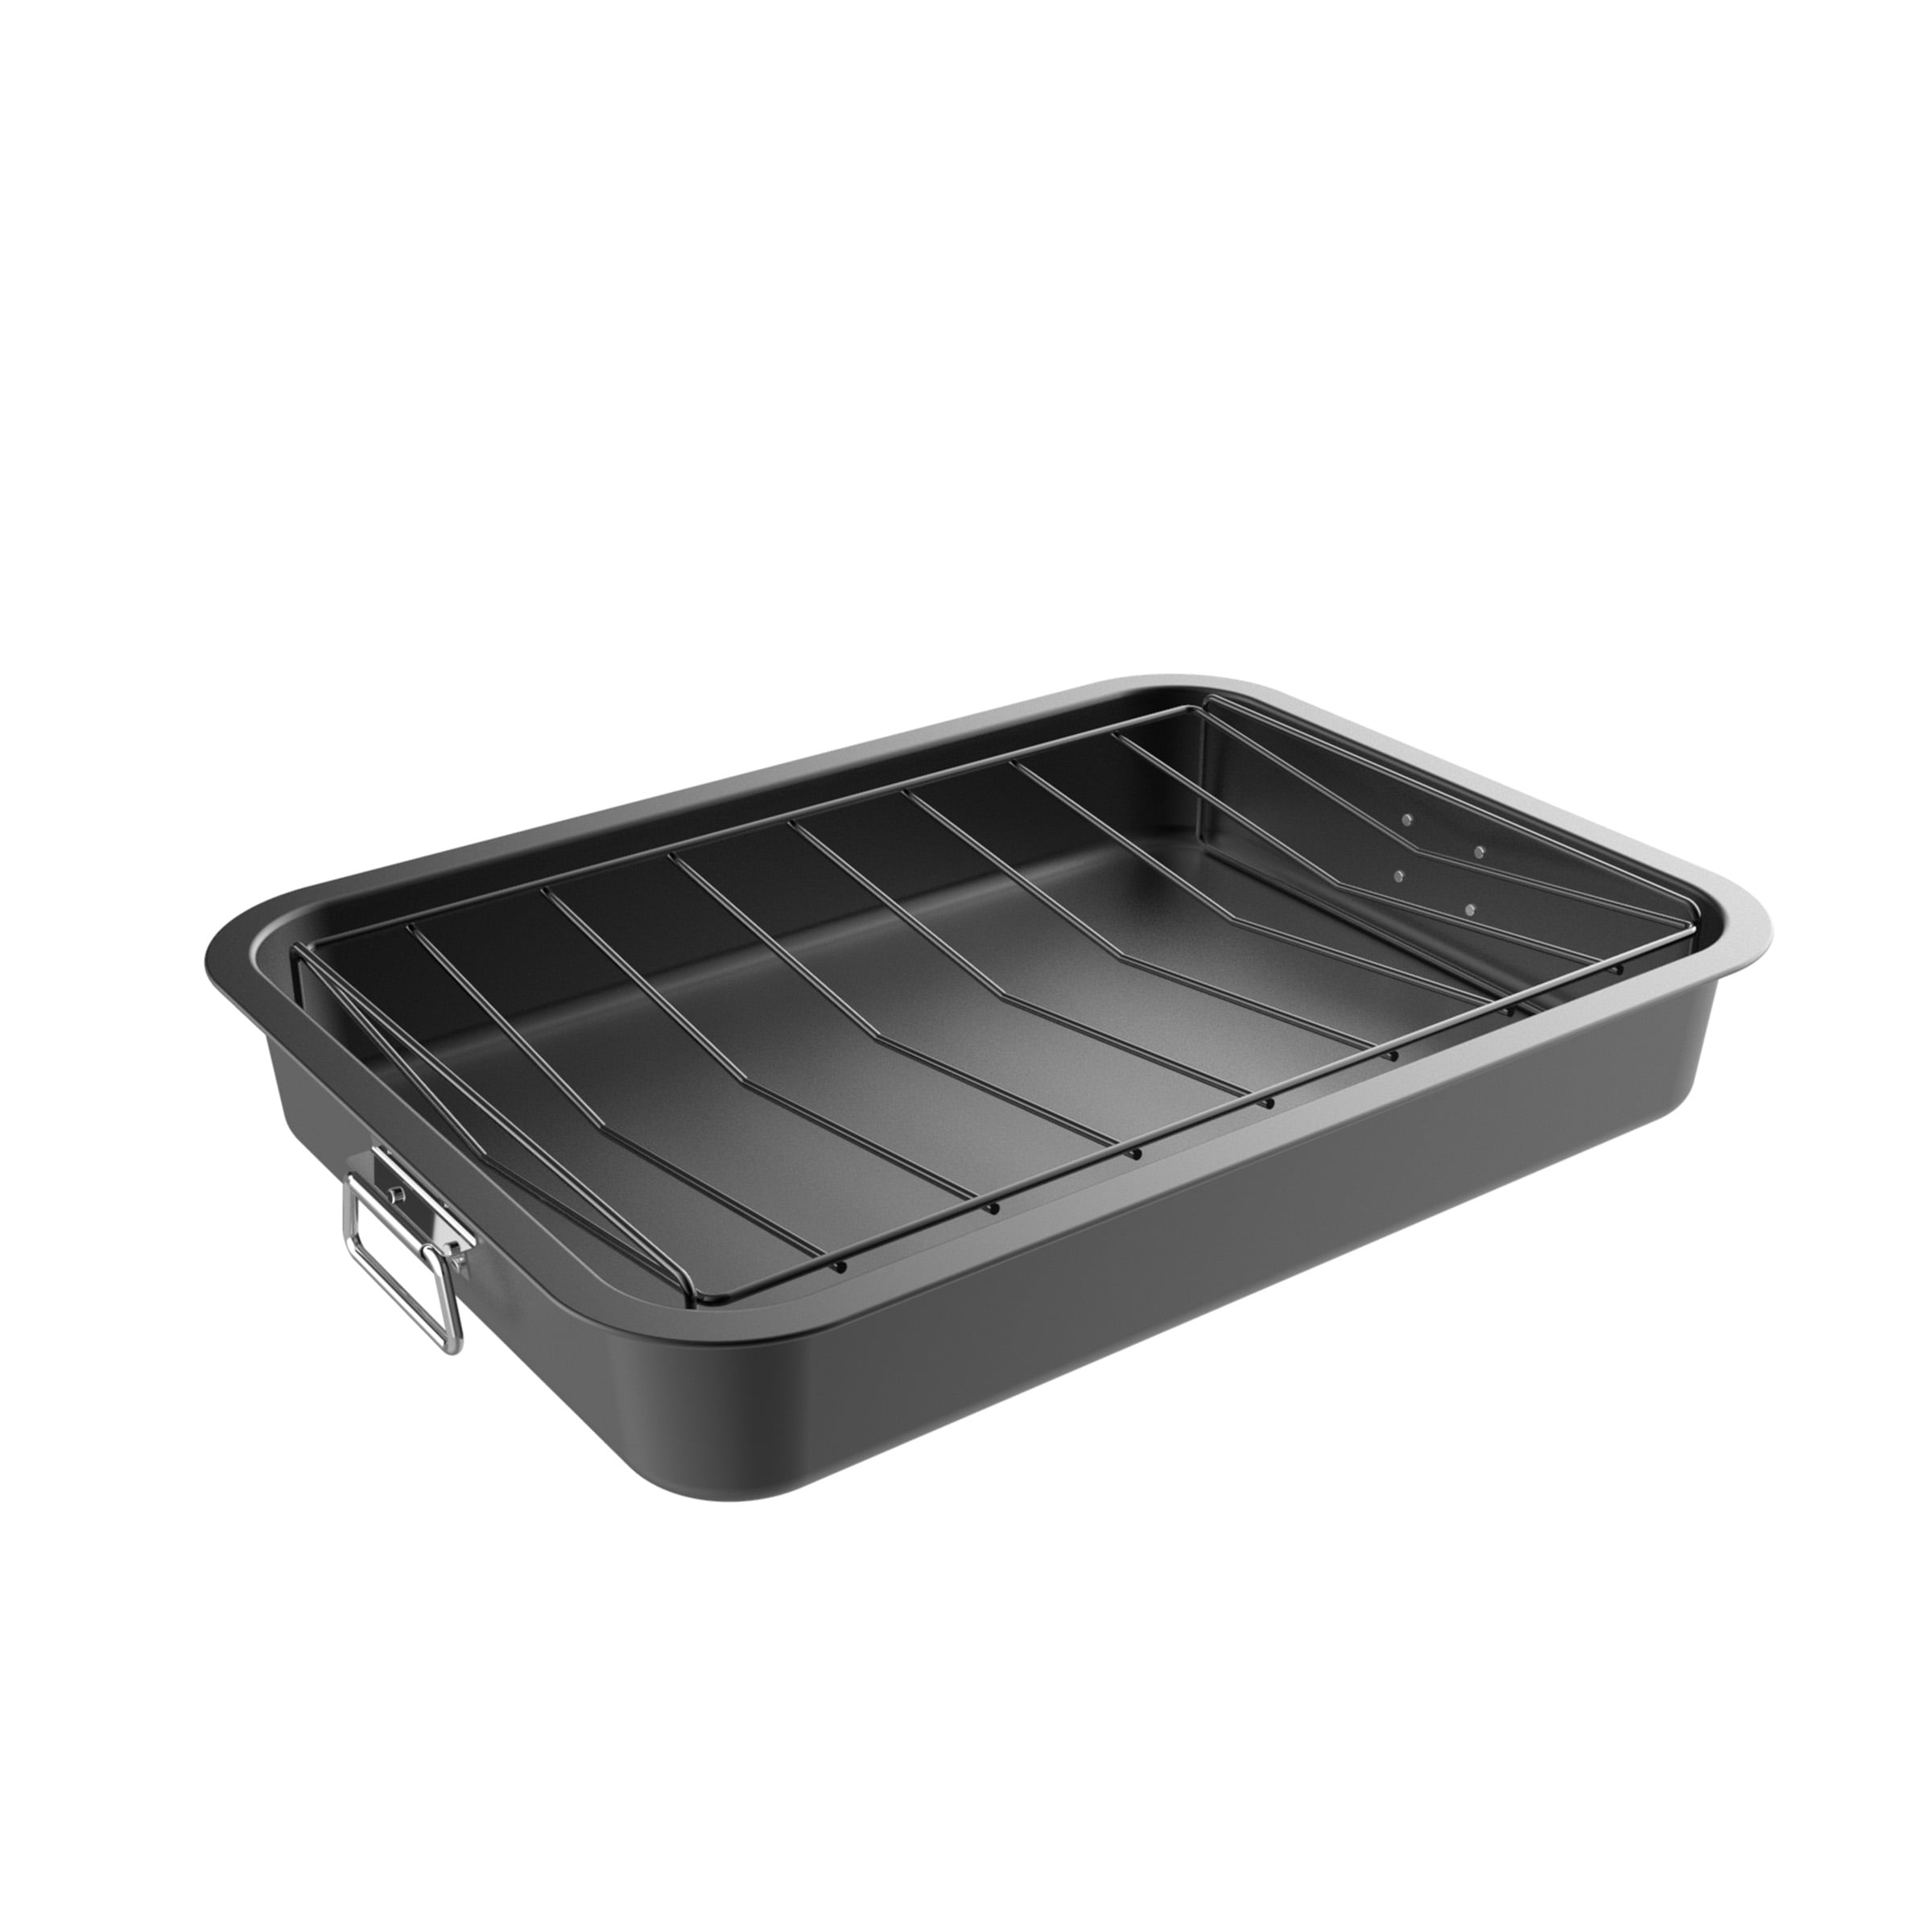 GENUINE SMEG A1-7 OVEN ROASTING PAN BAKING TRAY GREASE TRAP 595 X 370 mm 